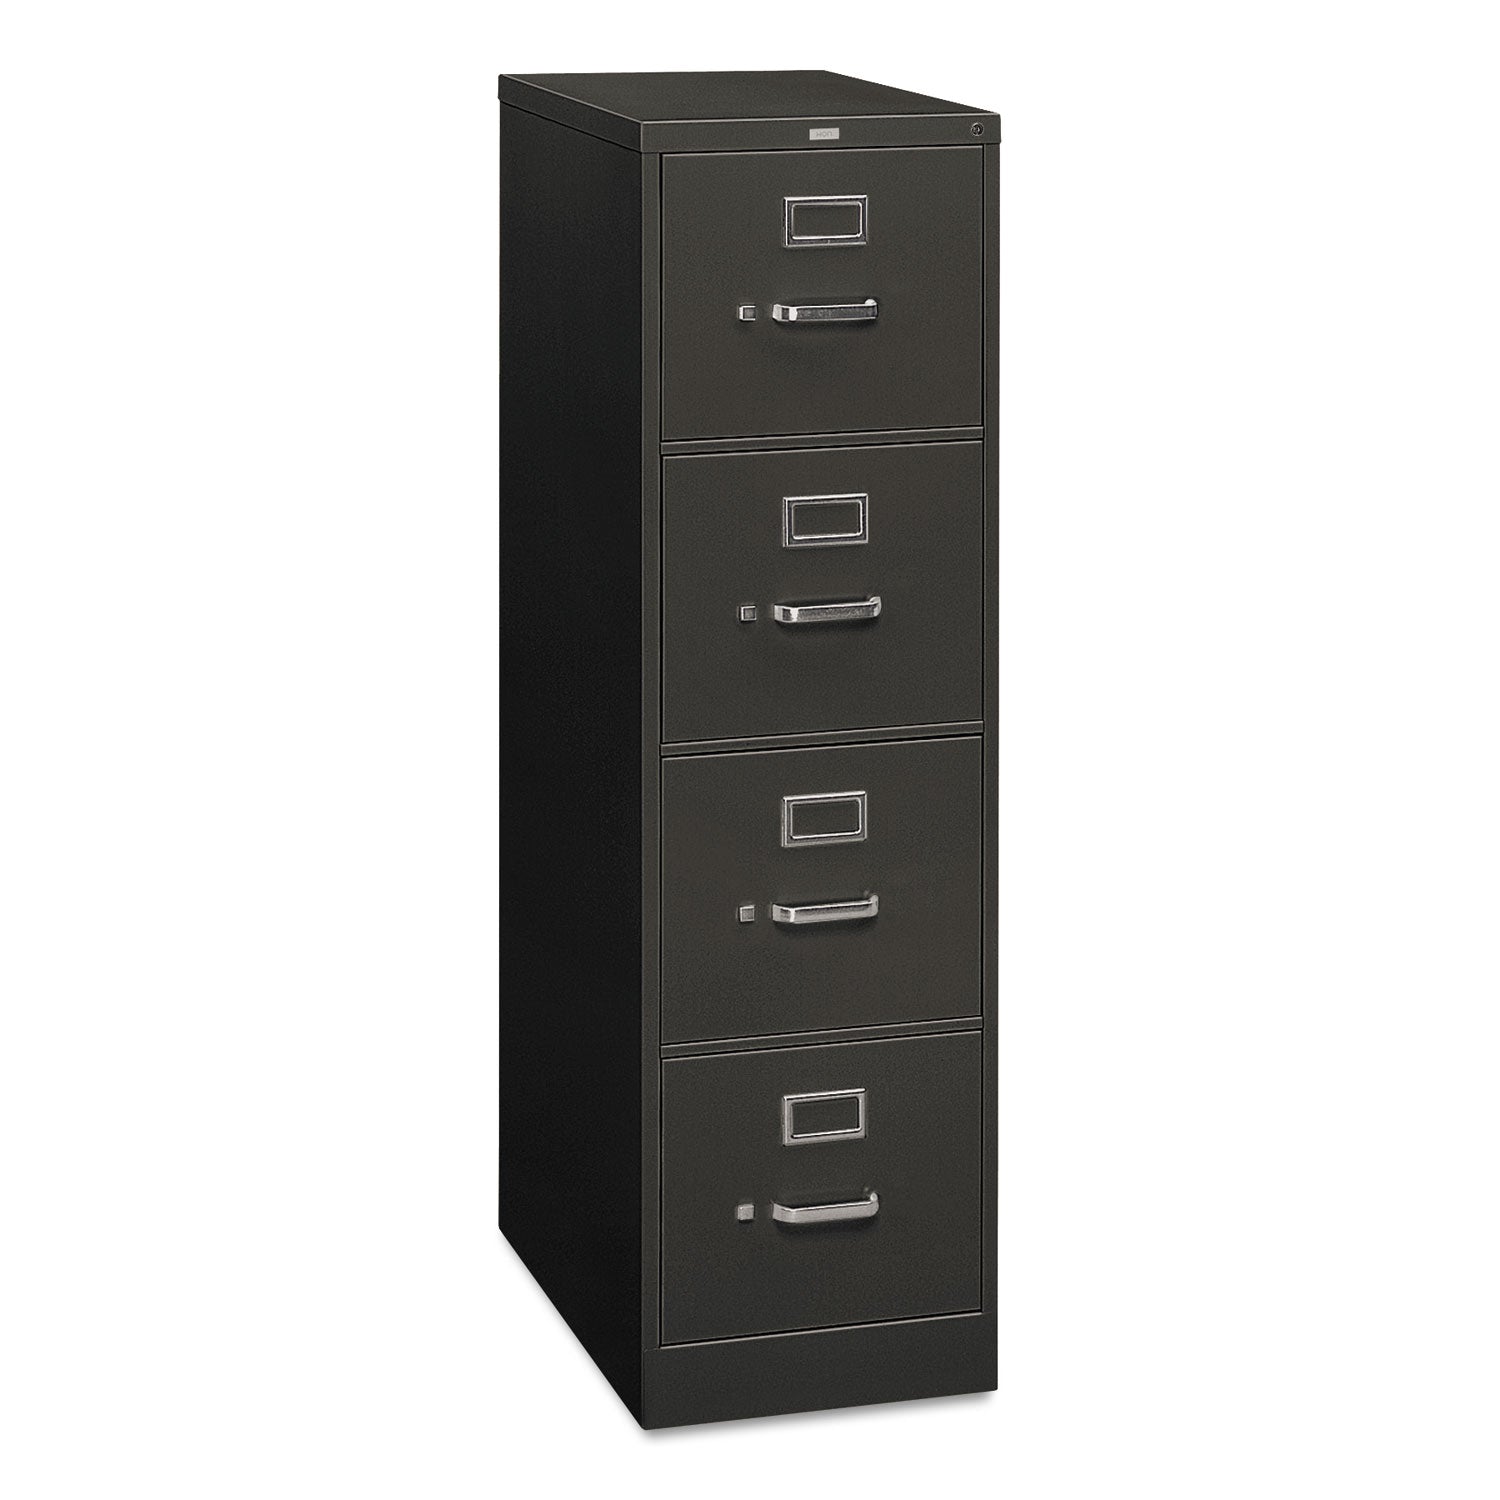 310 Series Vertical File, 4 Letter-Size File Drawers, Charcoal, 15" x 26.5" x 52 - 